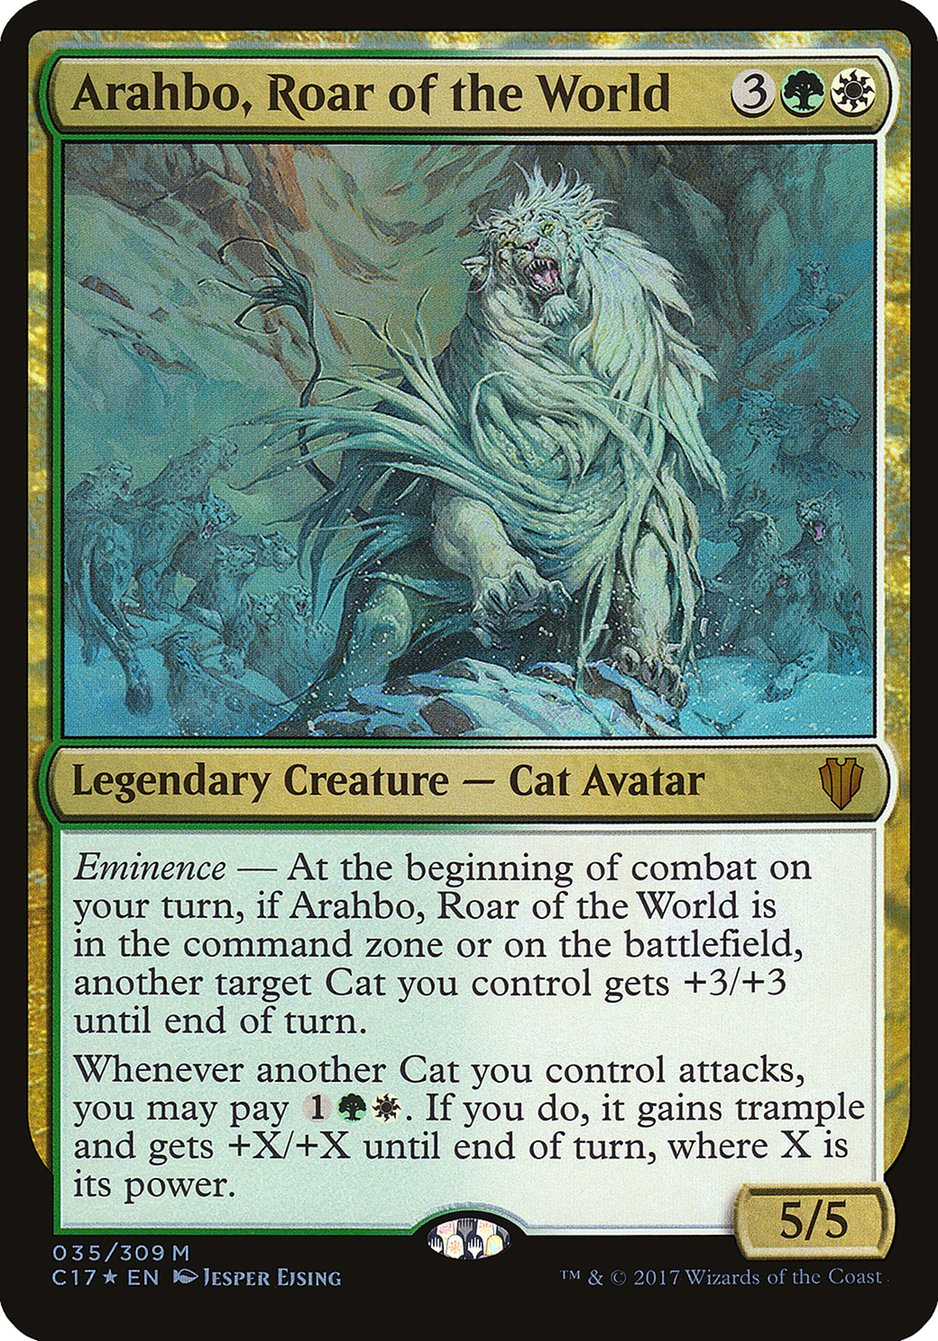 Arahbo, Roar of the World - MTG Card versions